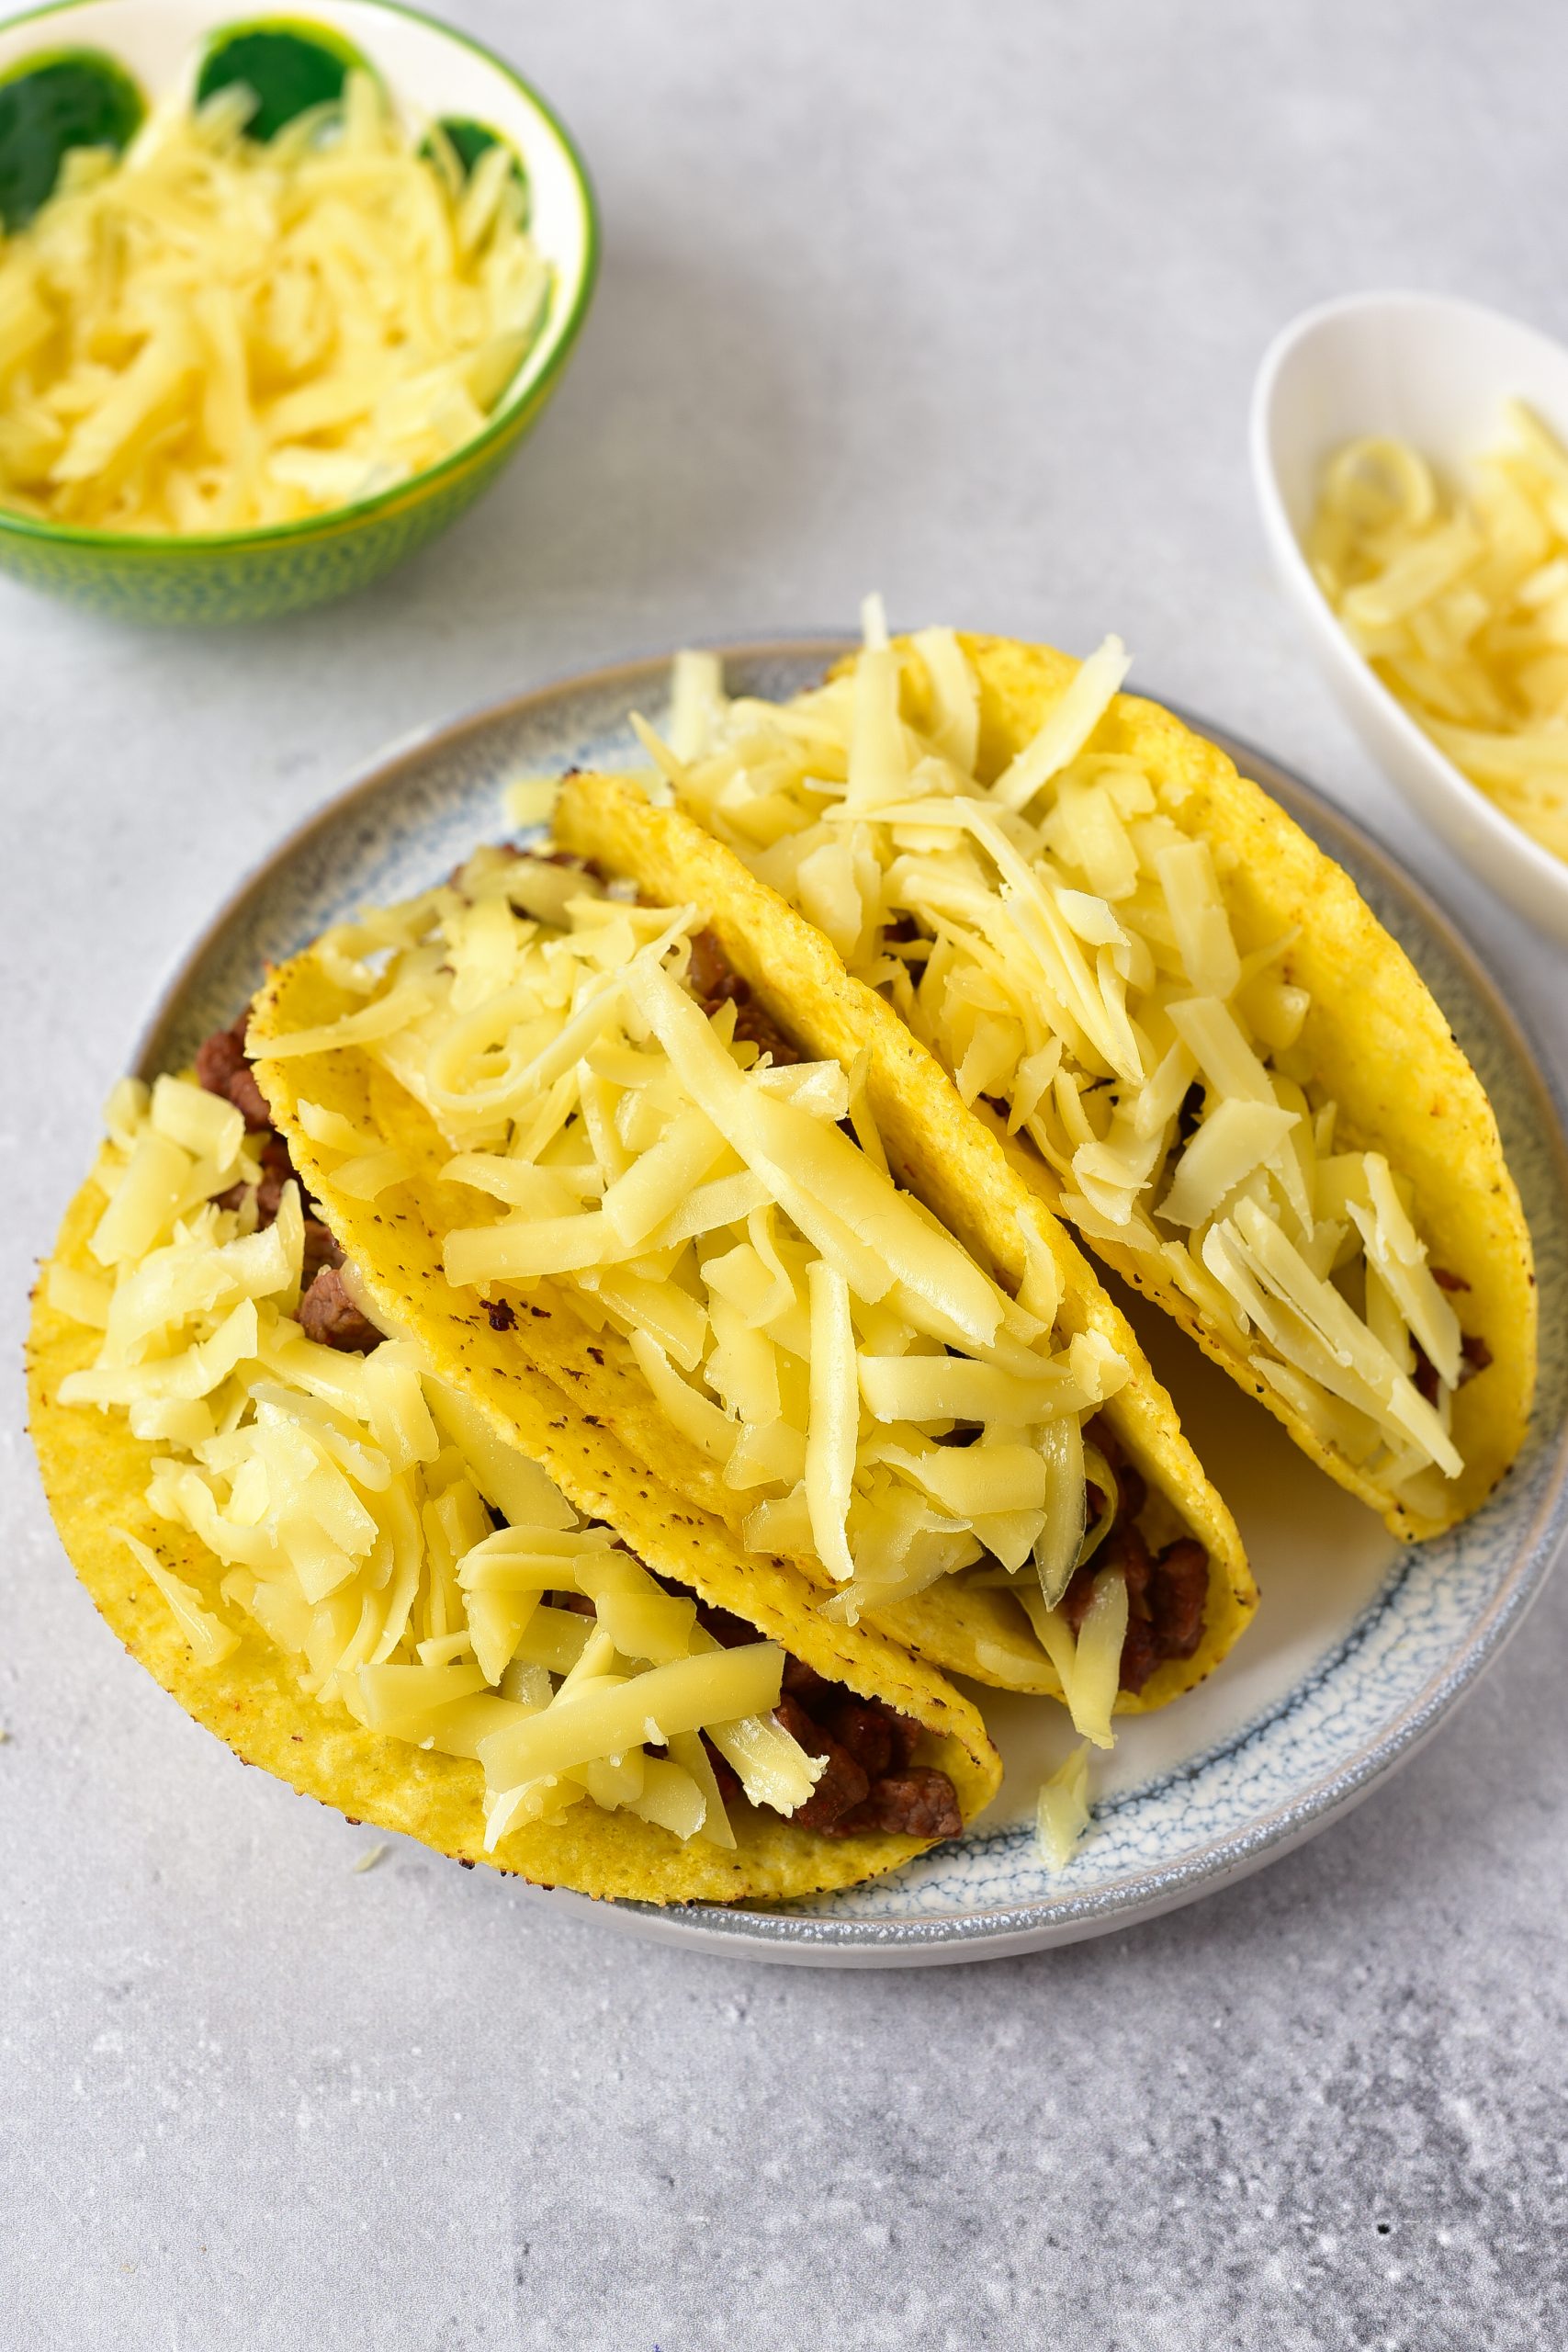 Layer the meat in the taco shells, and top with the shredded cheese. Bake for about 5-10 minutes, or until the cheese melts.